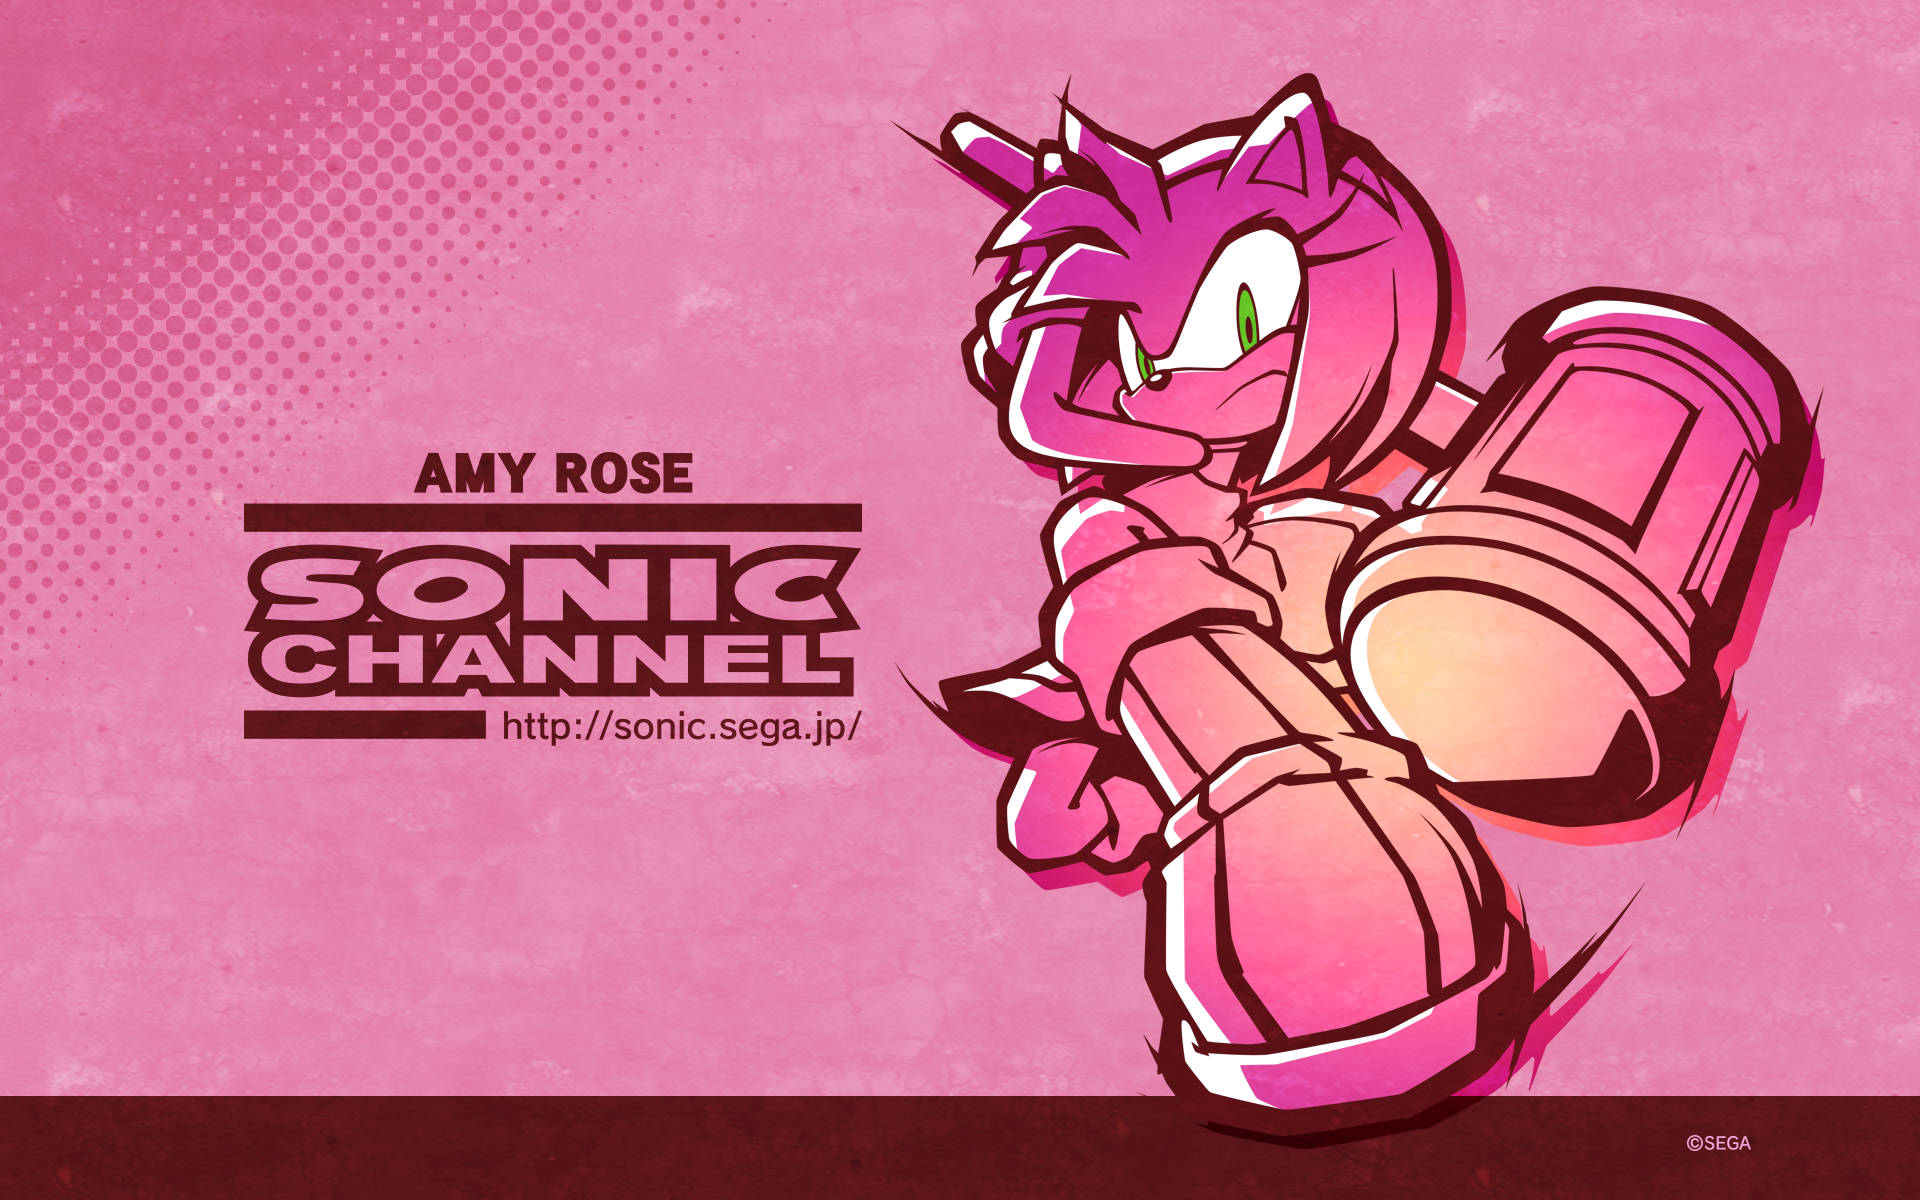 Amy Rose Pink Aesthetic Background